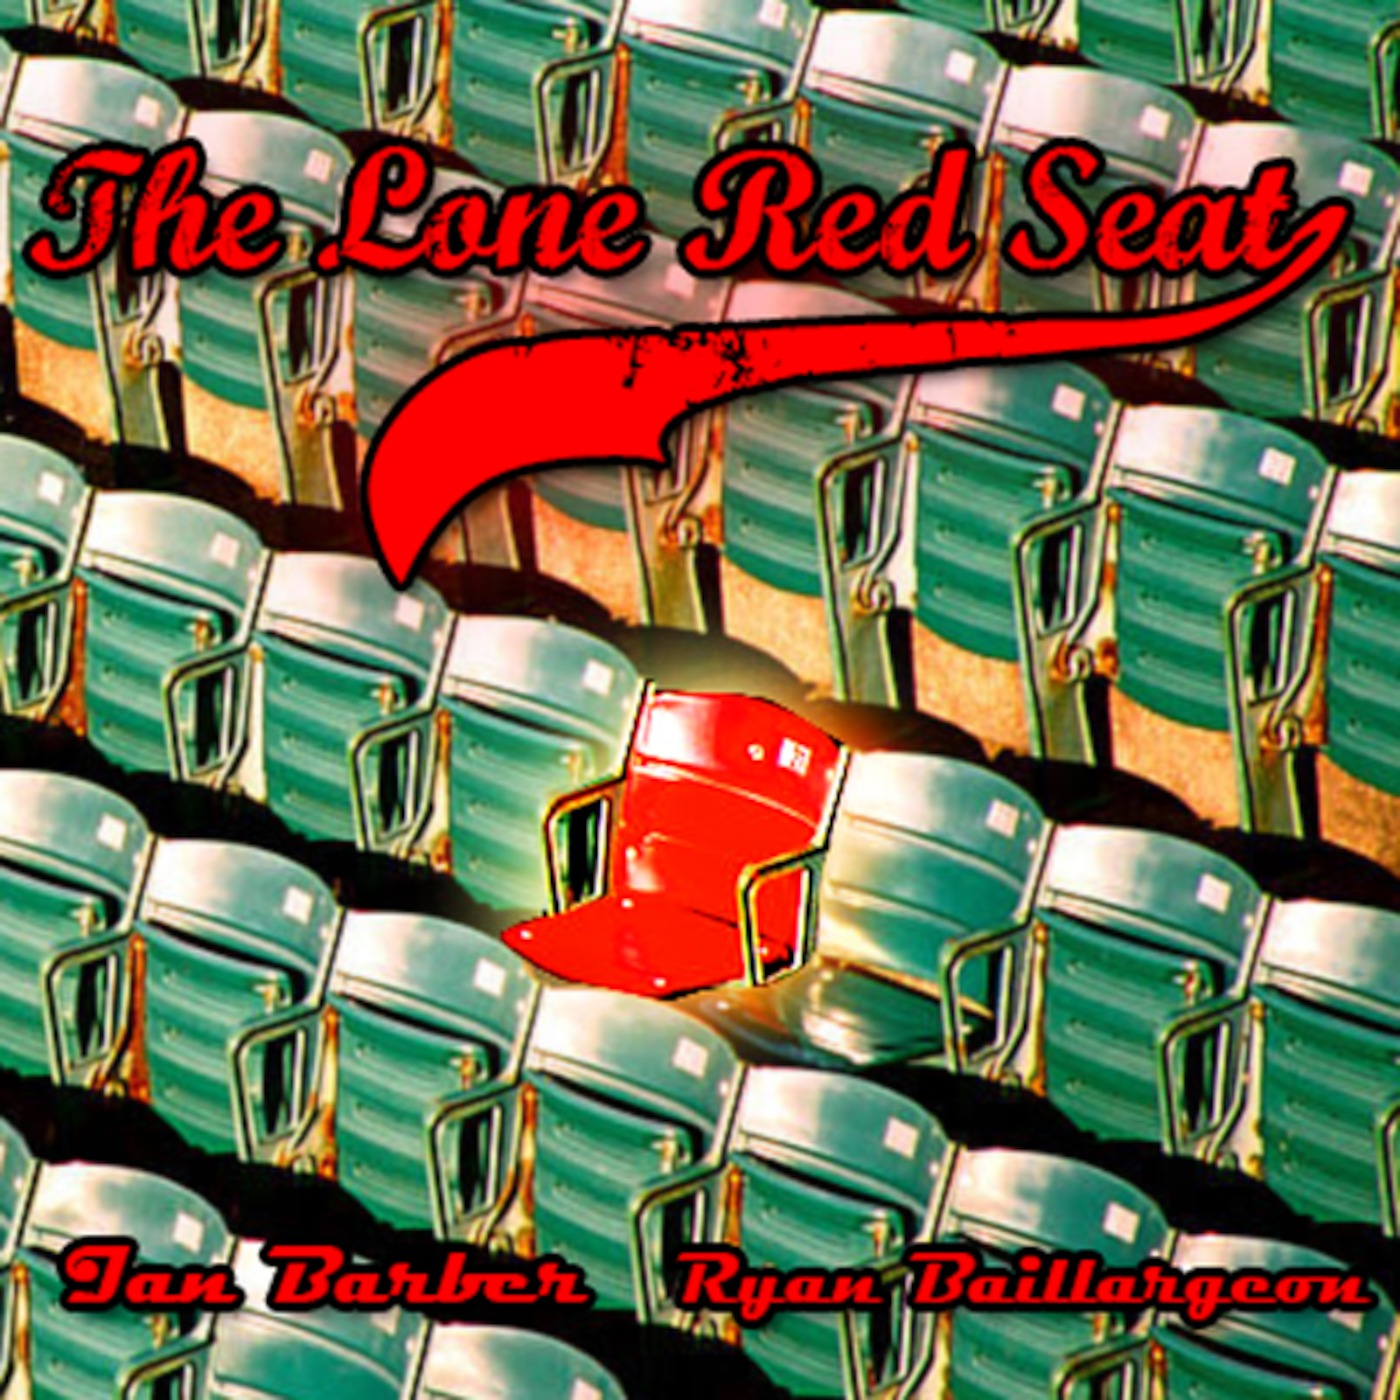 The Lone Red Seat - Boston Red Sox Podcast - Episode 3 - 4/7/14